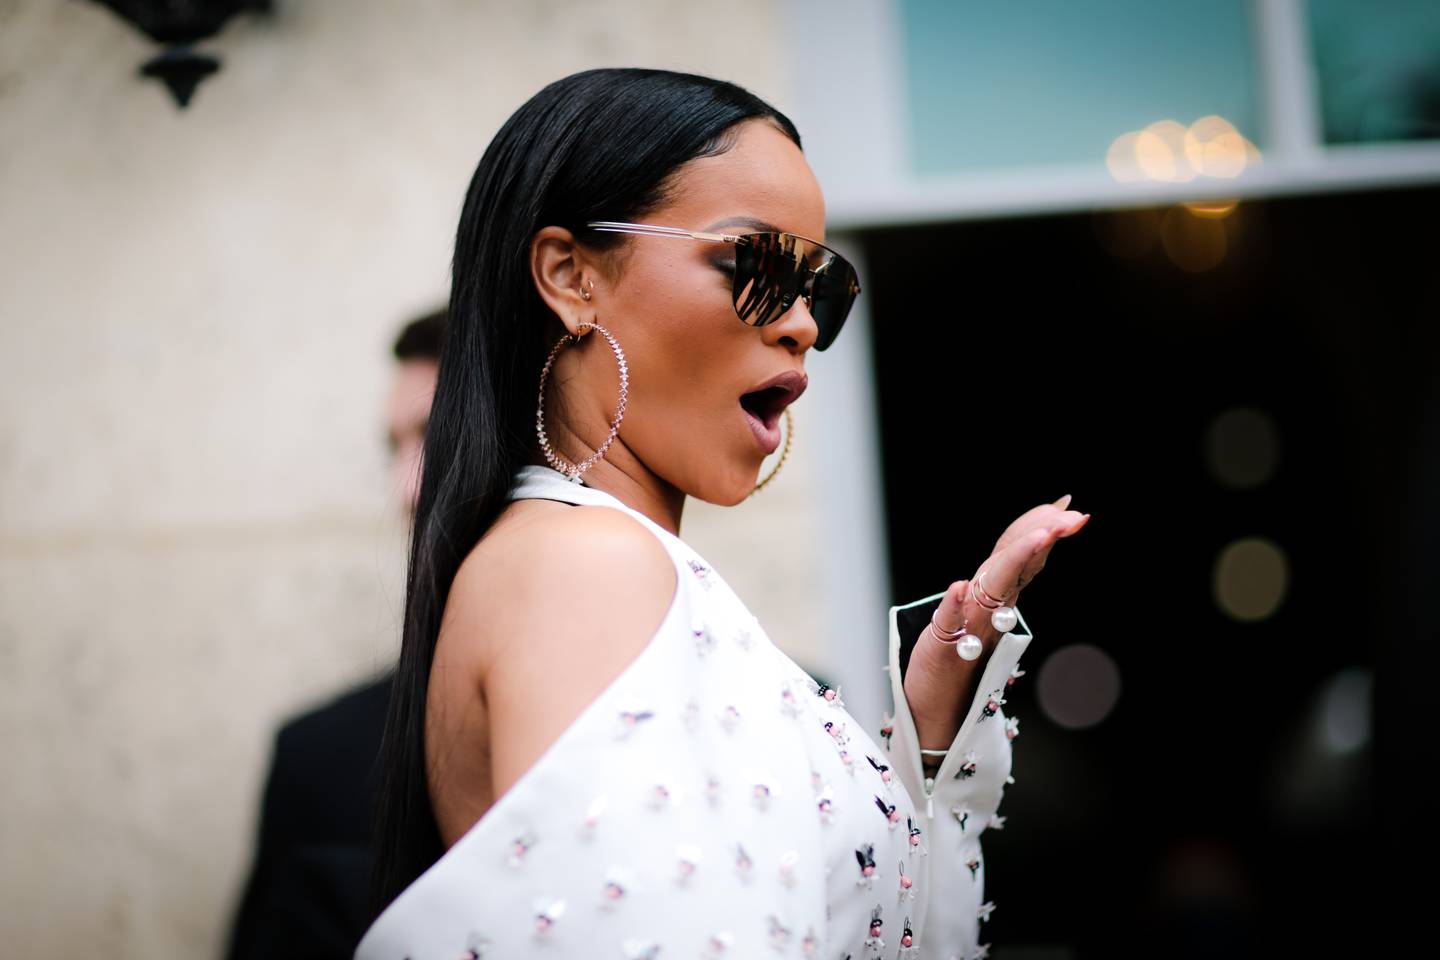 Rihanna's net worth is estimated by Forbes at $1.7 billion. Getty.